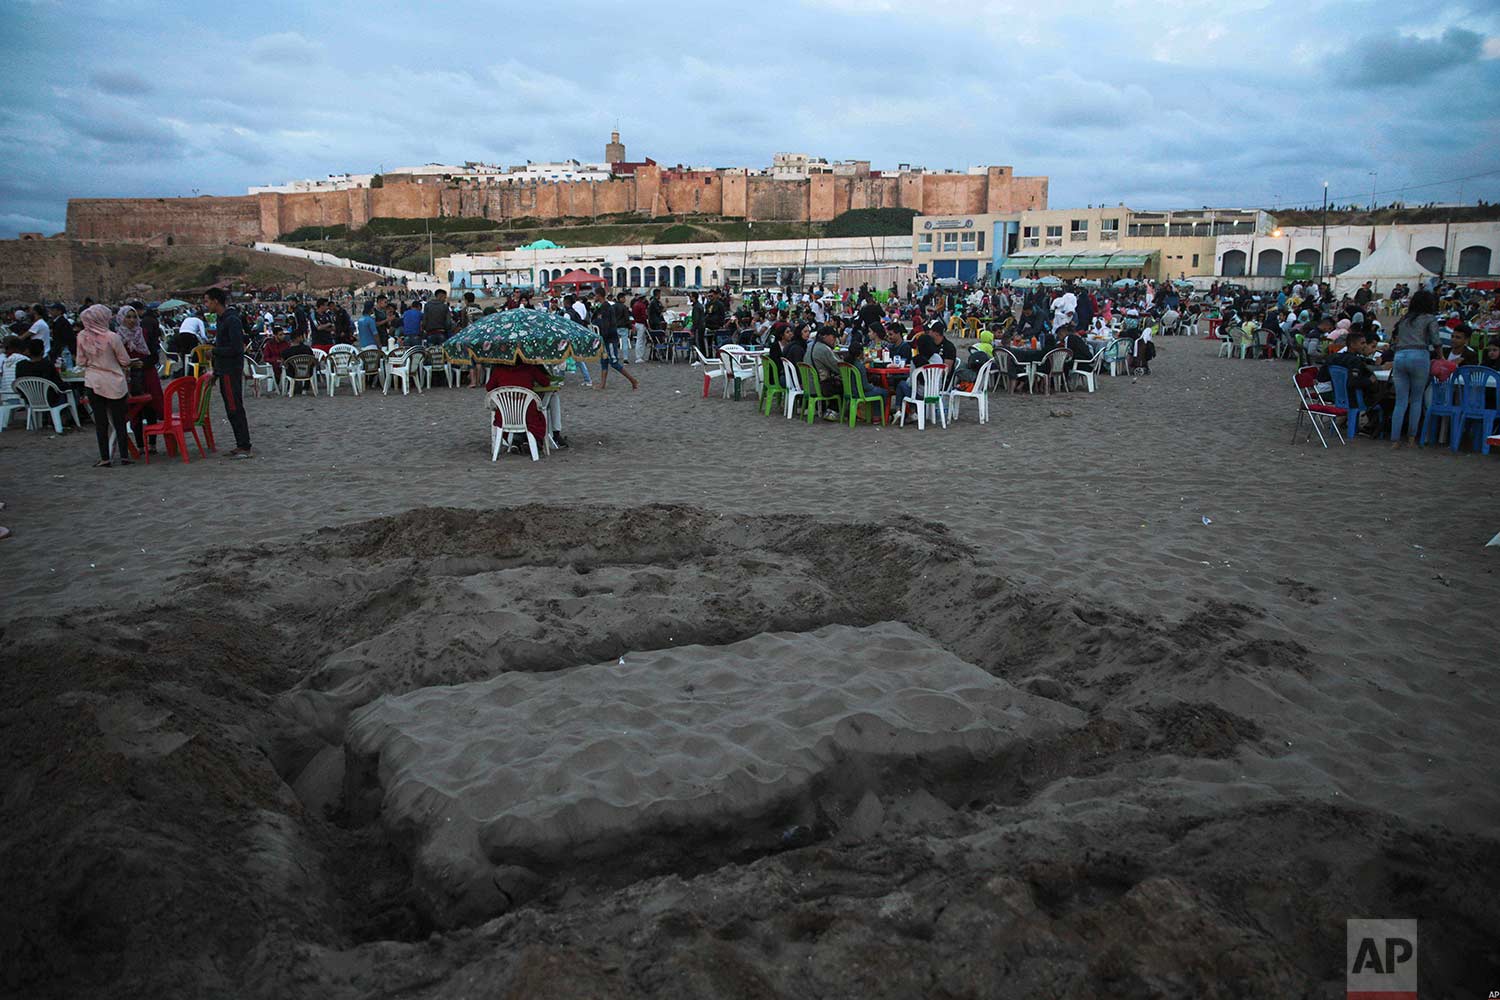  A table made of sand is prepared for friends and families to use to break their fast on the beach in the holy month of Ramadan, in Rabat, Morocco, Saturday, June 9, 2018. (AP Photo/Mosa'ab Elshamy) 